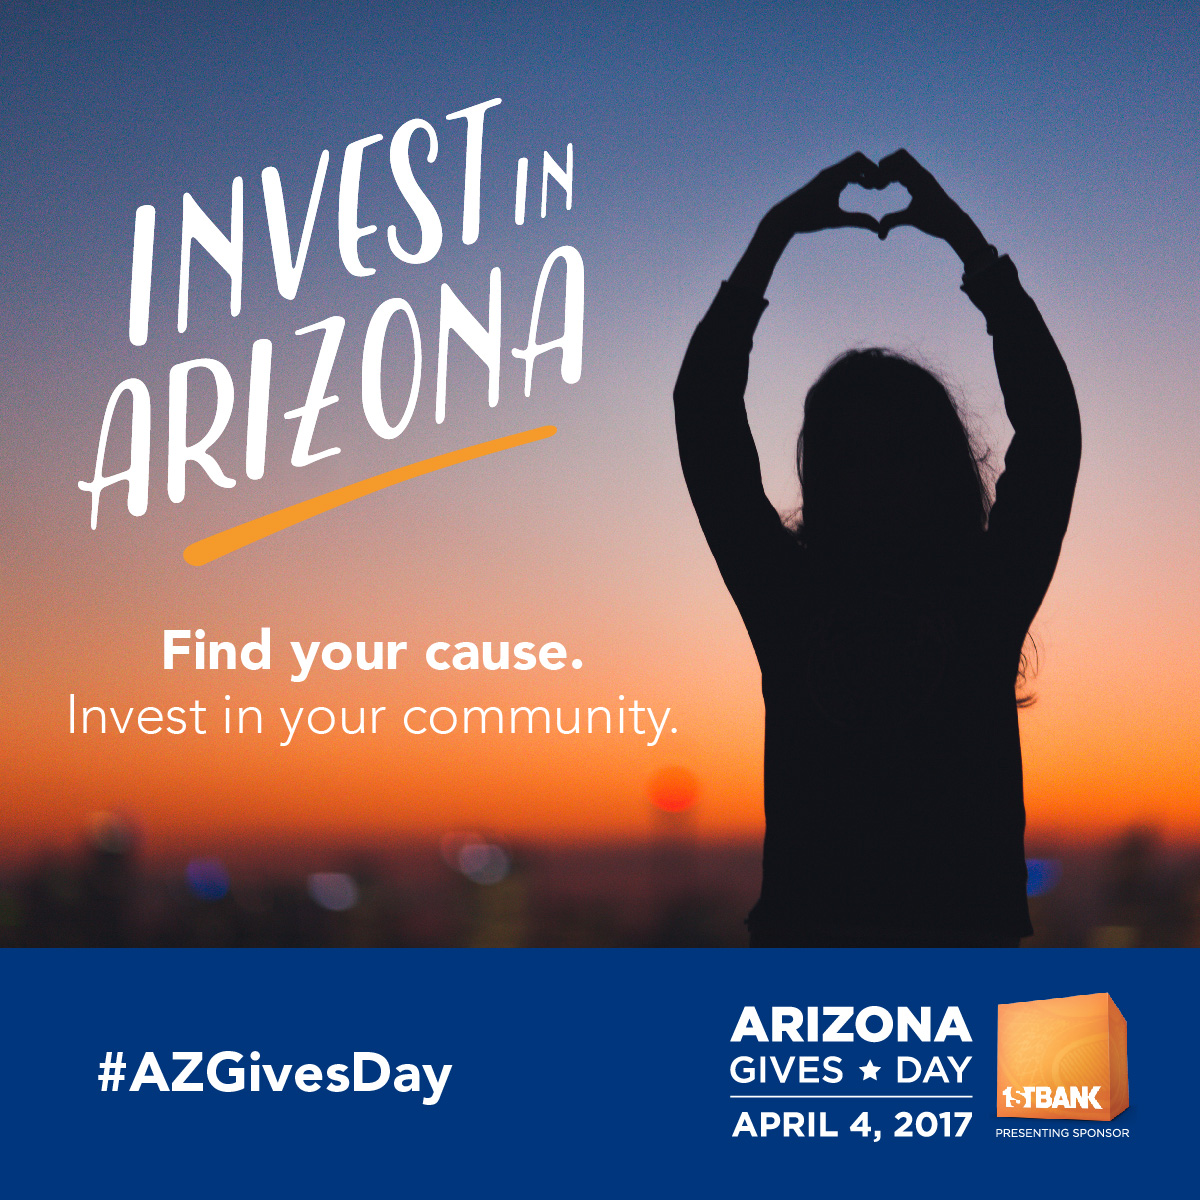 Provision Project Is Proud to Participate in Arizona Gives Day, April 4, 2017